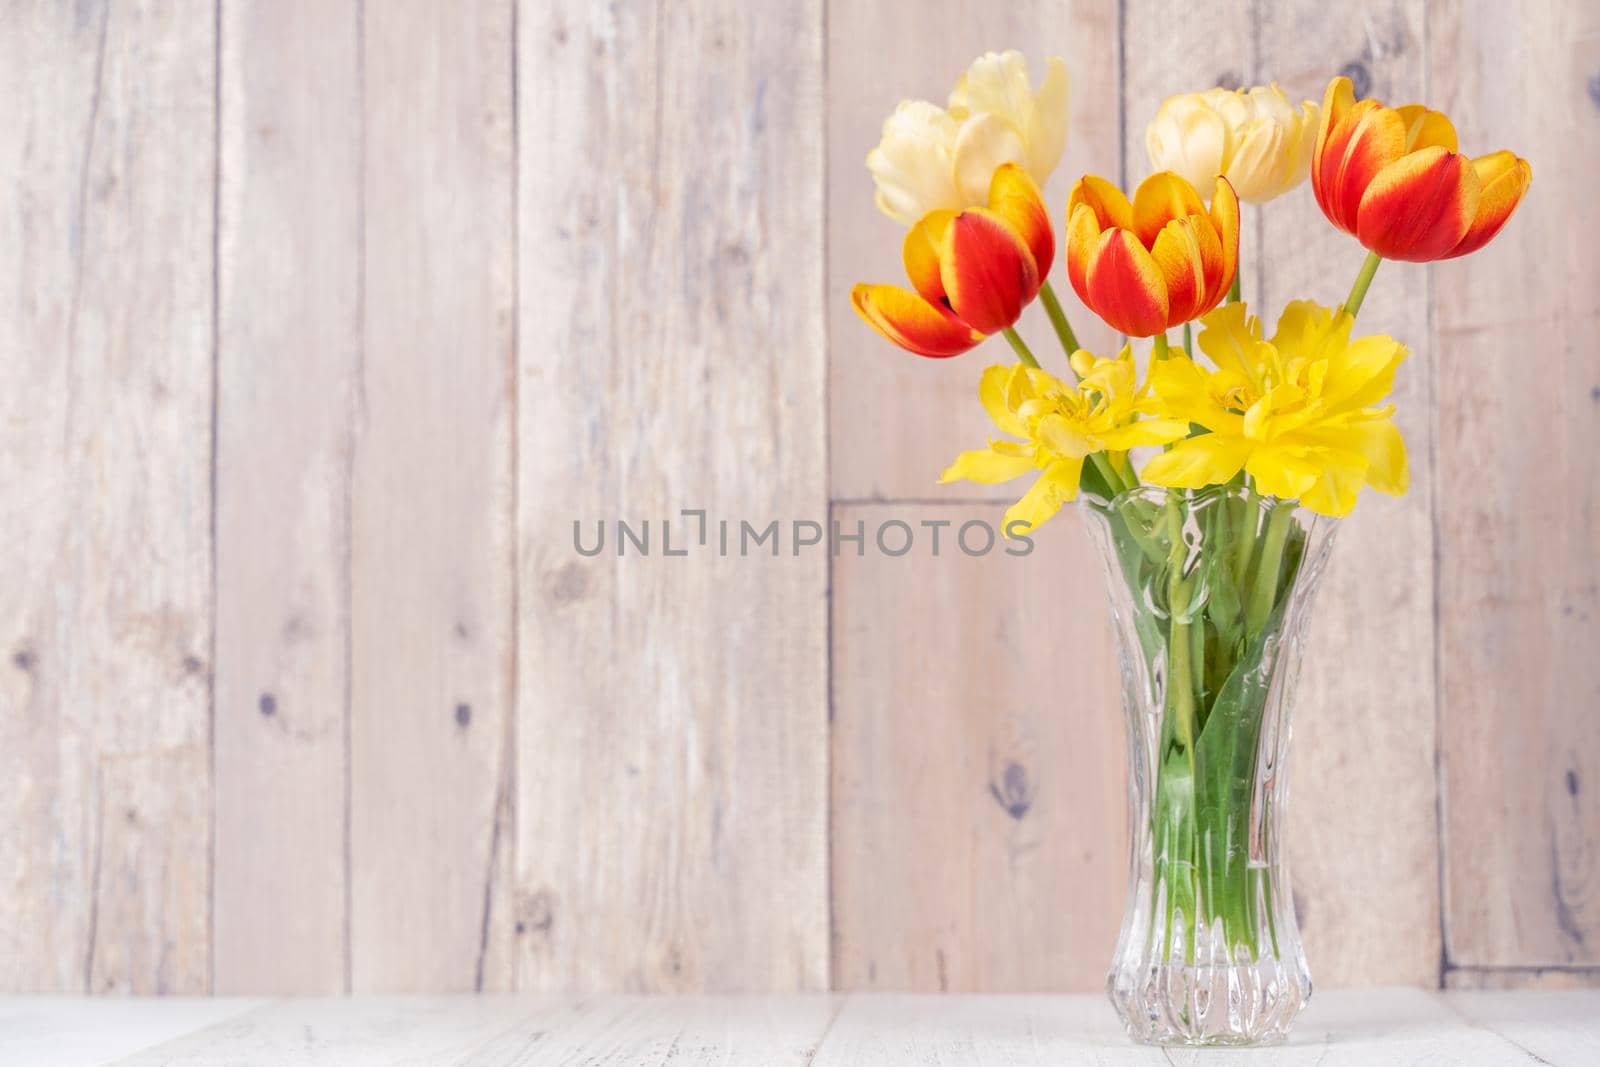 Tulip flower arrangement in glass vase with heart greeting, watering can decor on wooden table background wall, close up, Mother's Day design concept.